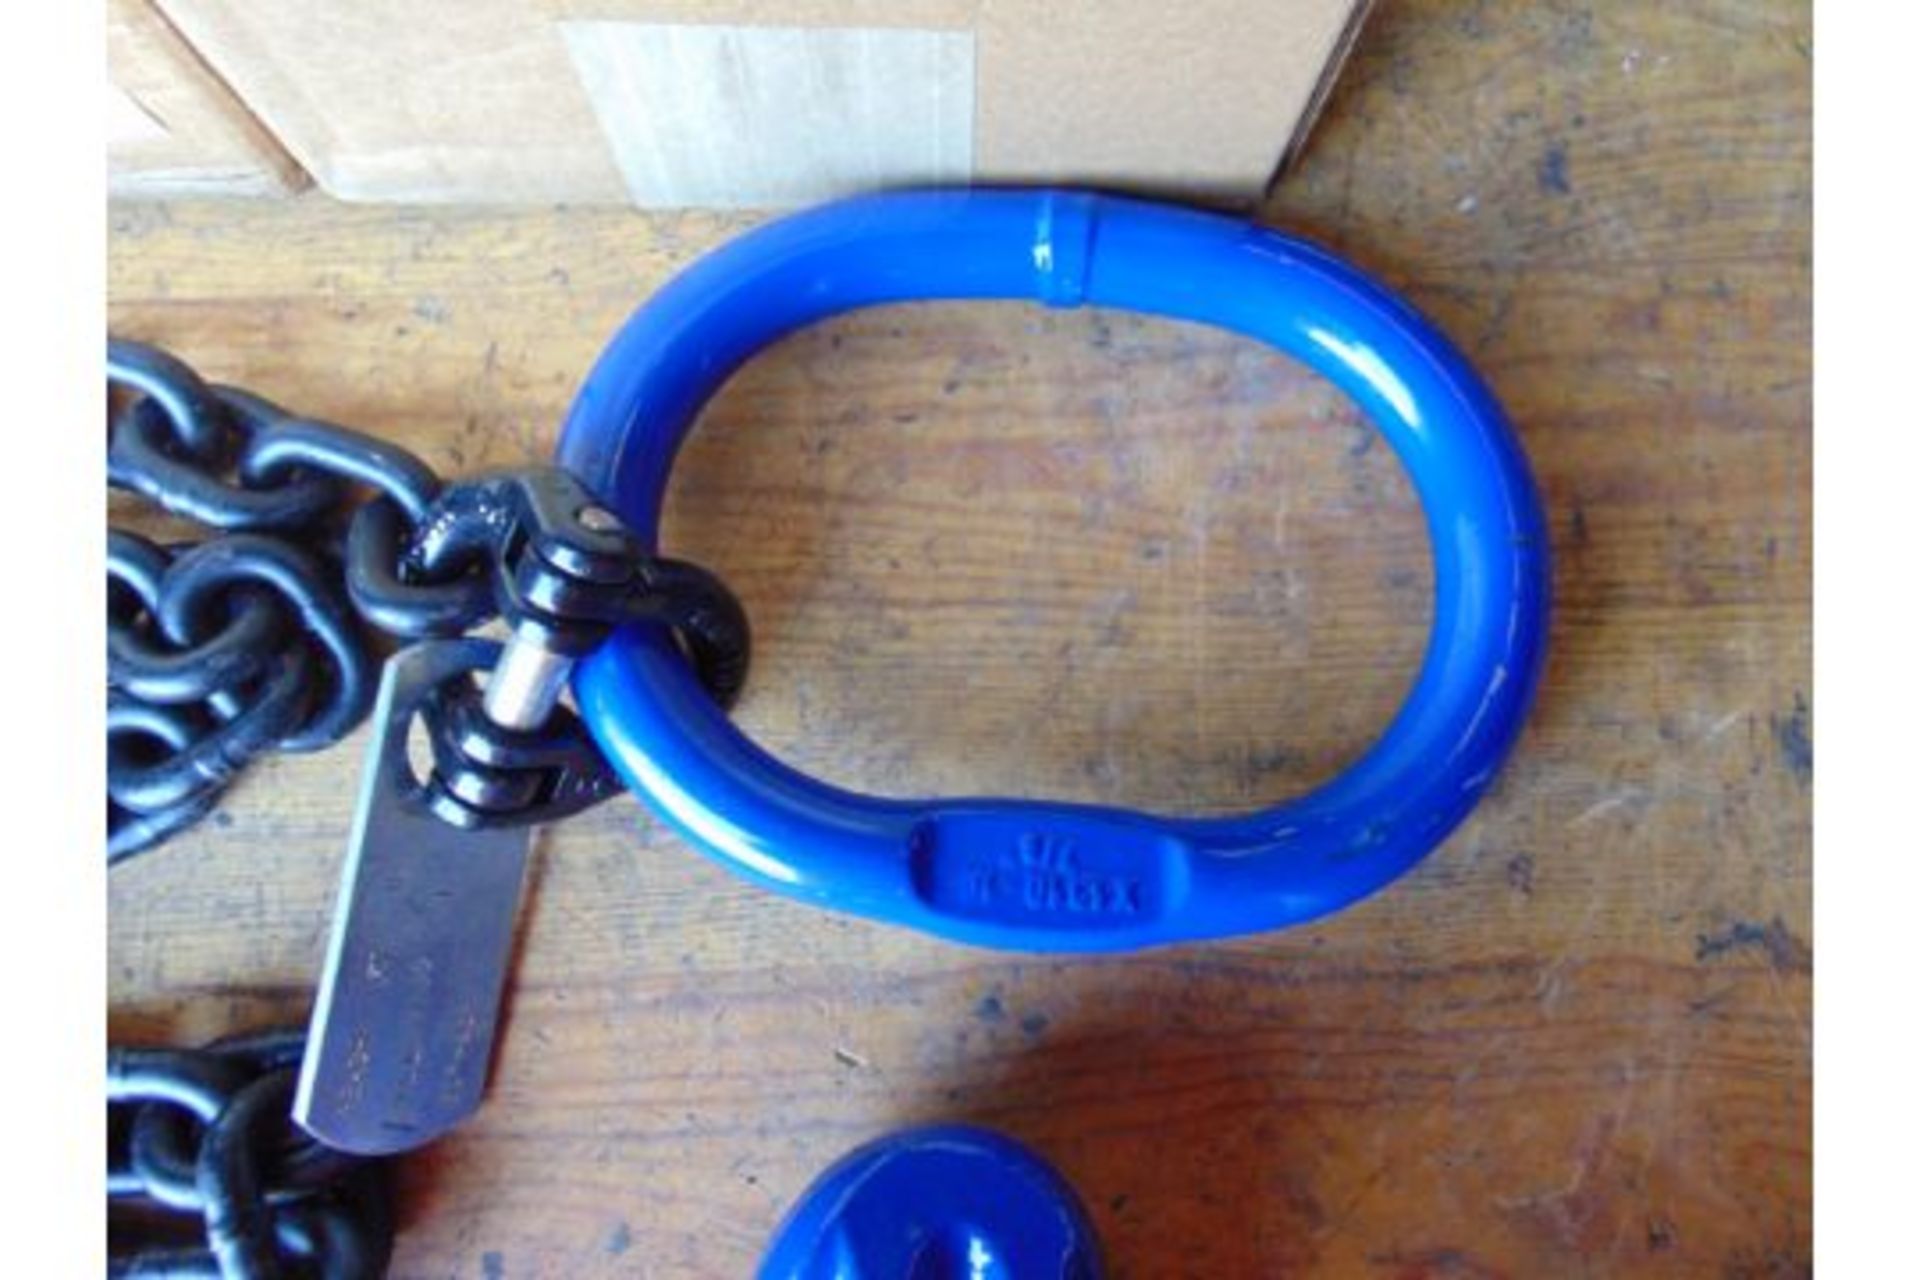 2 x New Unissued 10ft Lifting Chains c/w Labels - Image 3 of 5